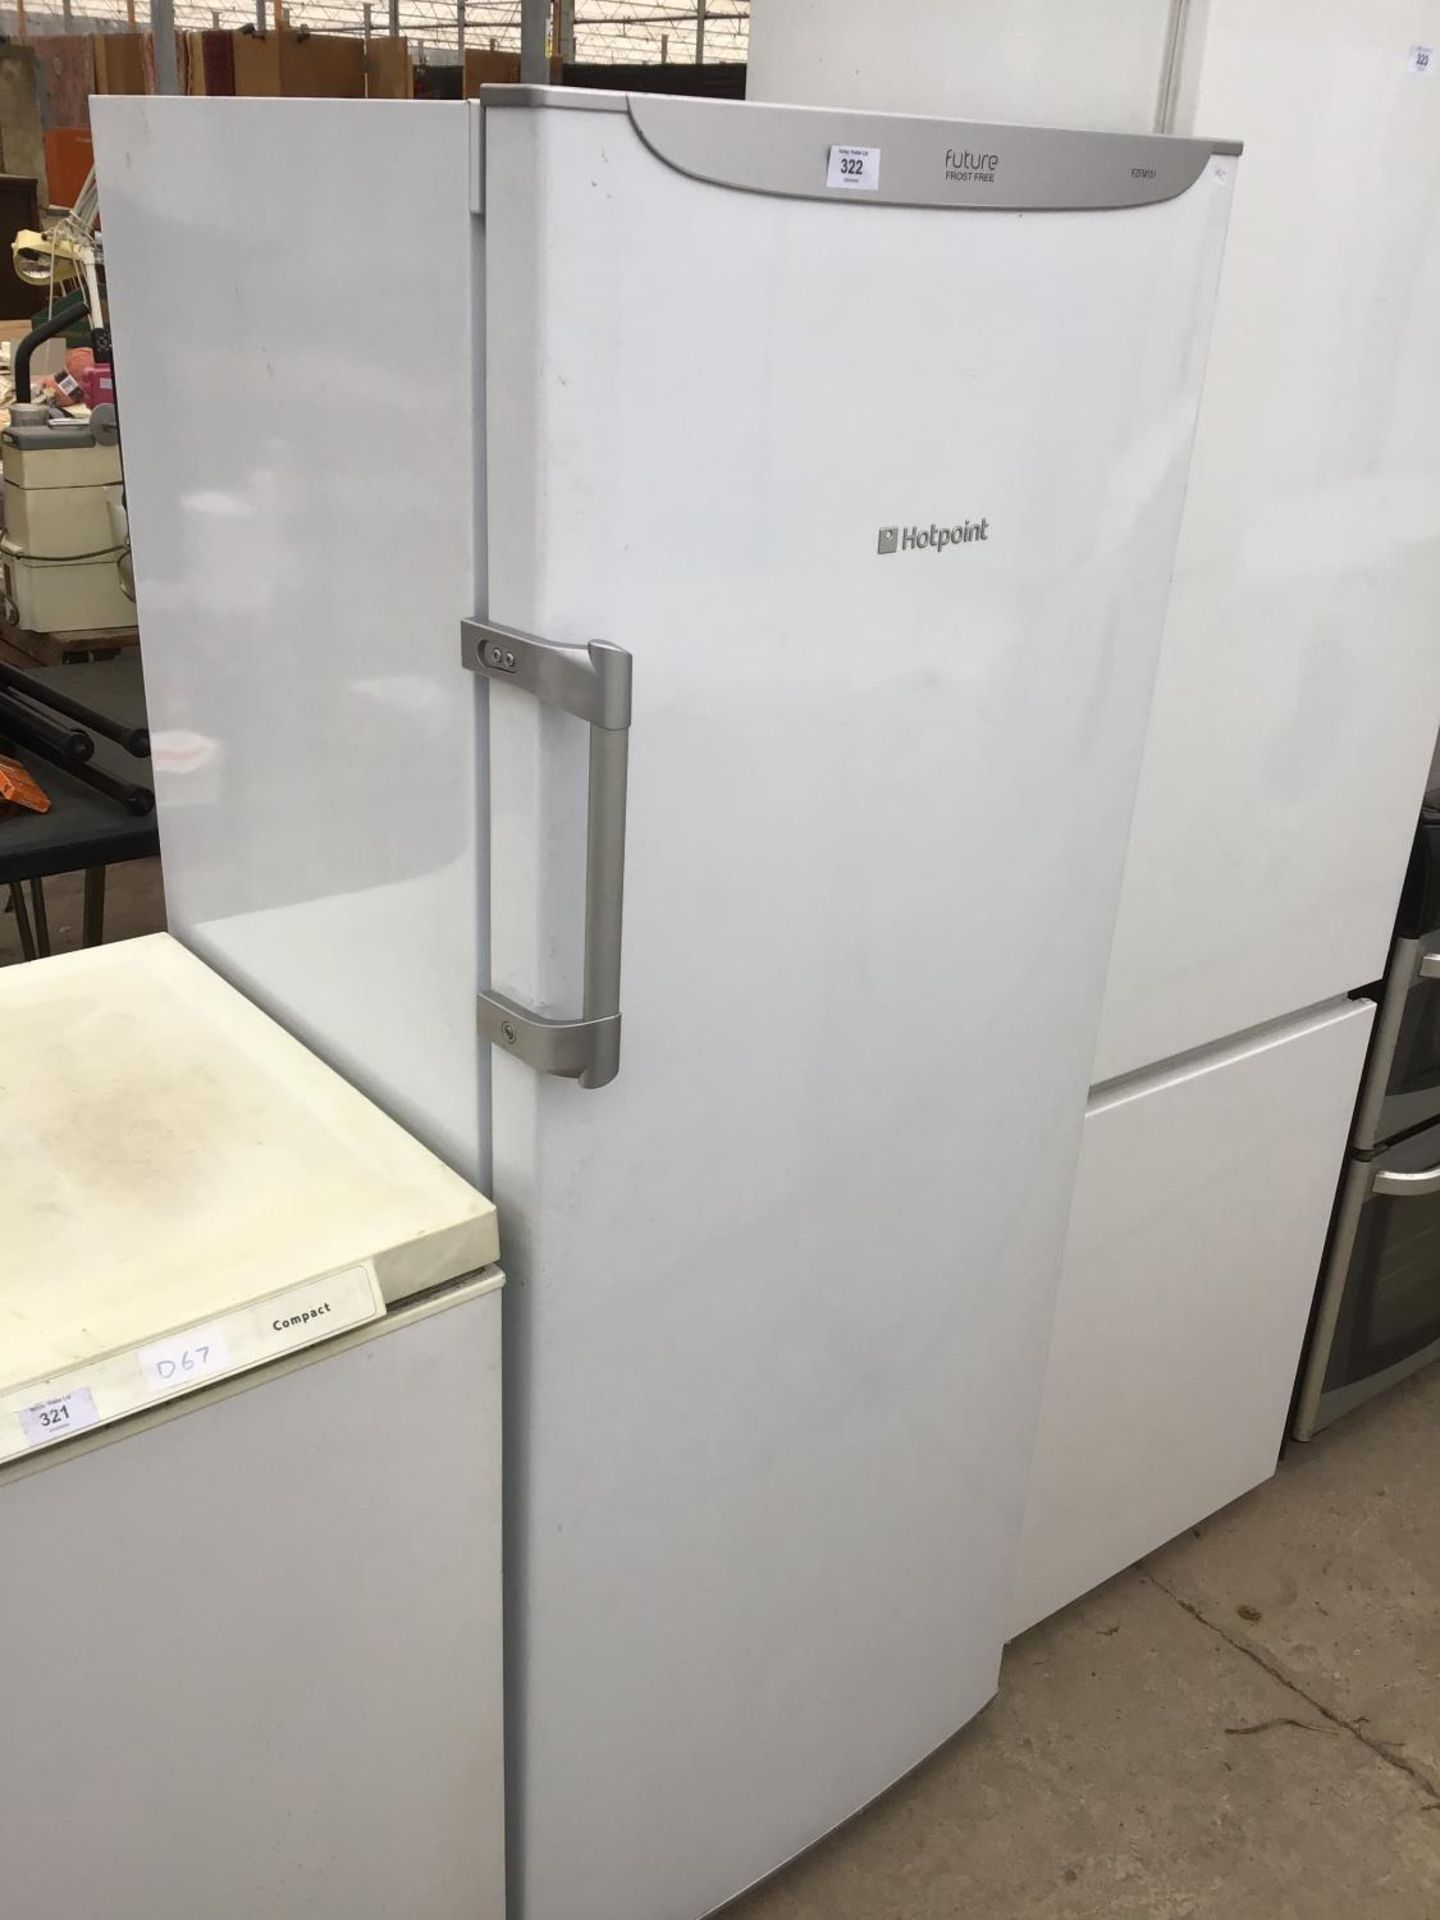 AN UPRIGHT HOTPOINT FUTURE FROST FREE FREEZER IN FAIRLY CLEAN AND WORKING ORDER